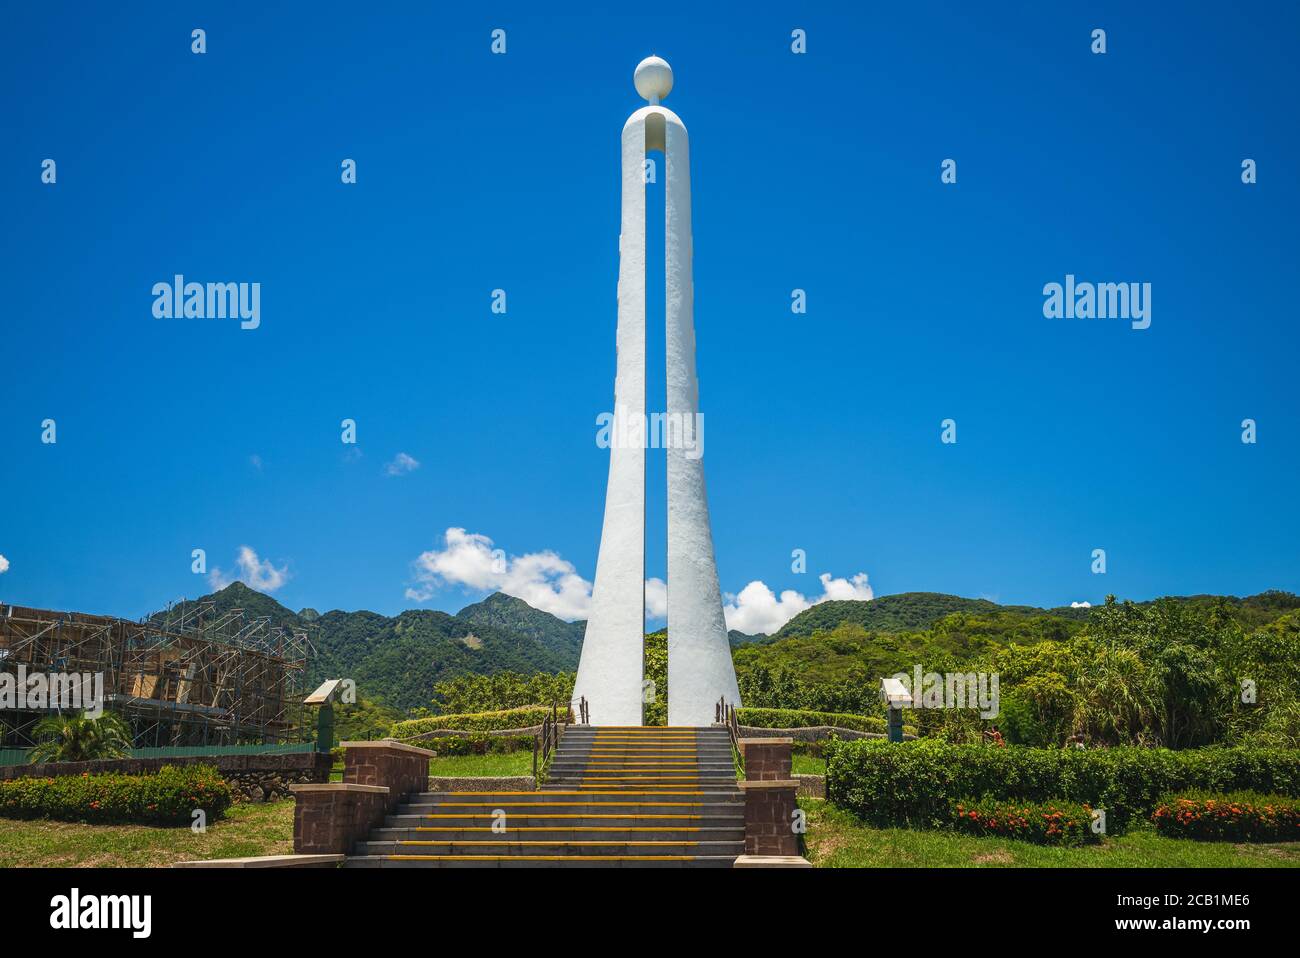 The Tropic of Cancer Marker at Hualien, Taiwan Stock Photo